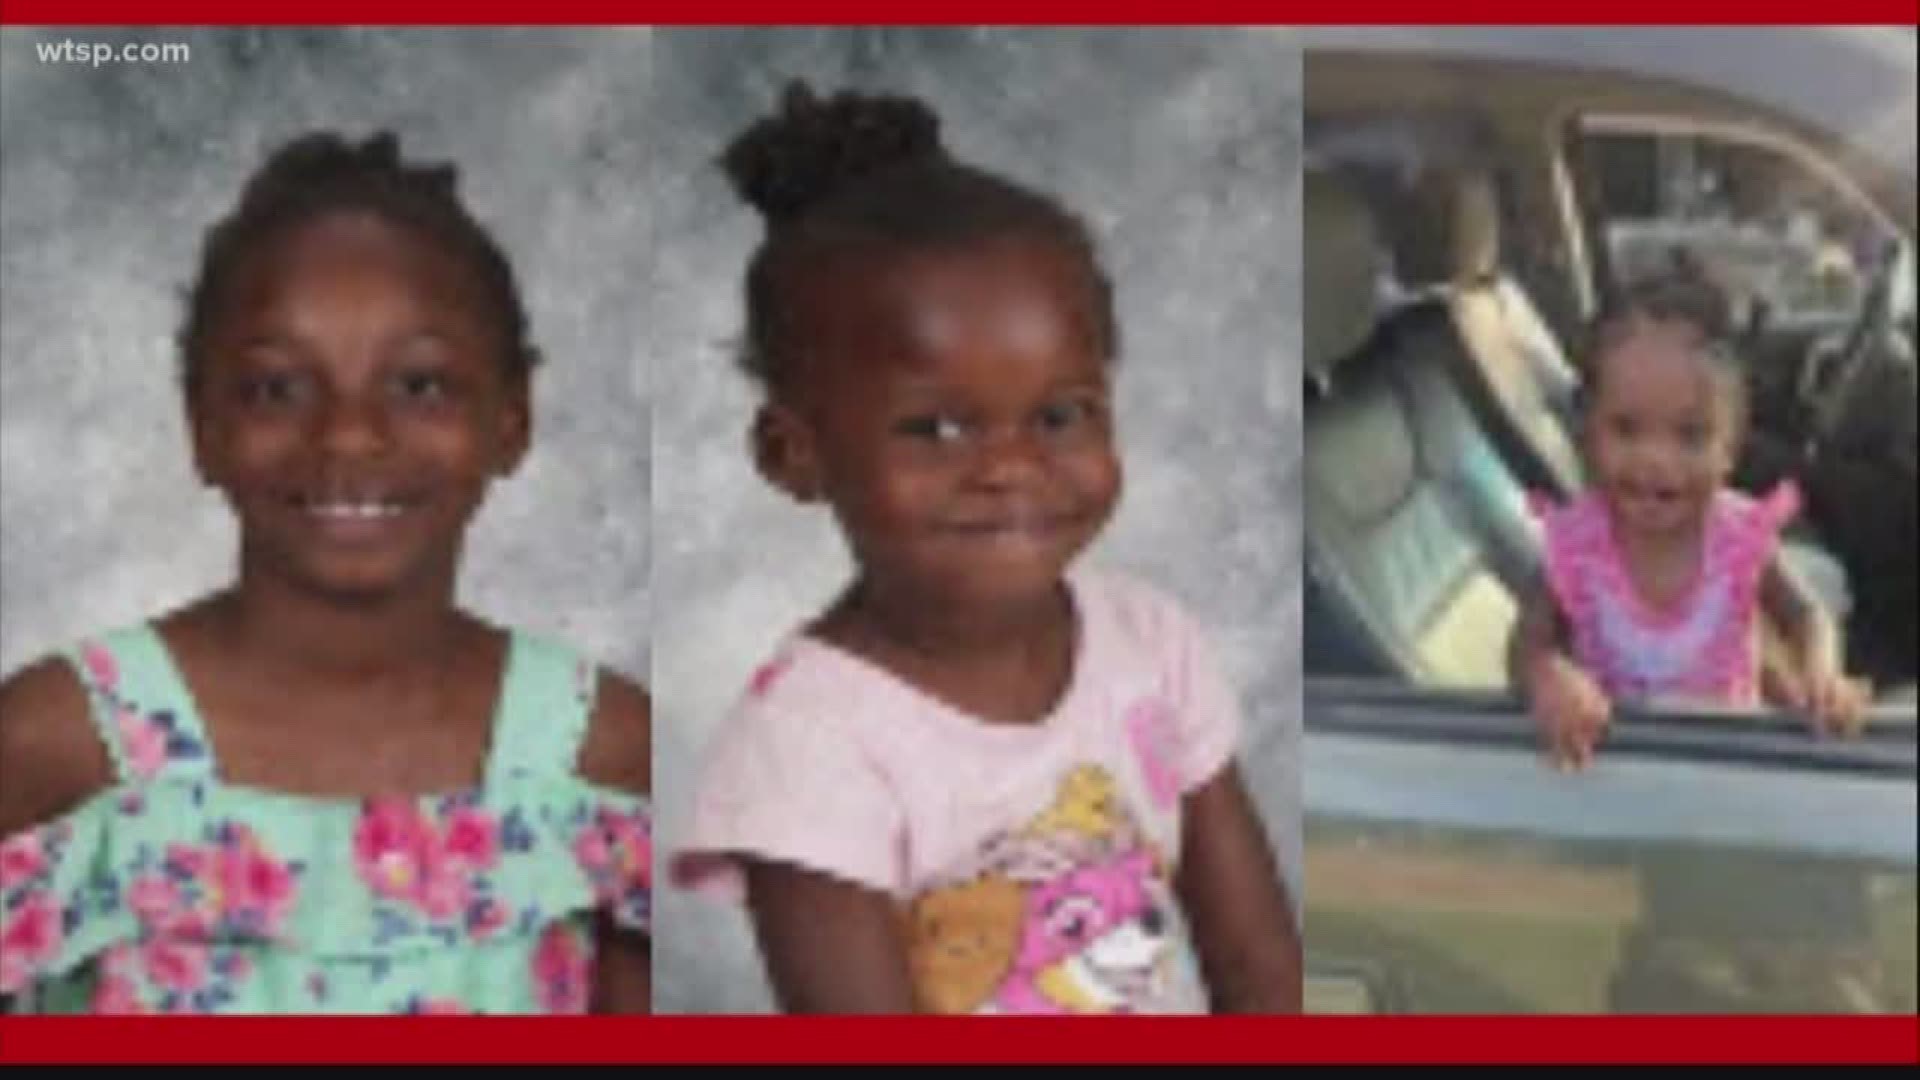 Iyana Sailor, Nahlia Wade and Noelle Wade were last seen in Seffner and may be traveling with a 25-year-old woman.